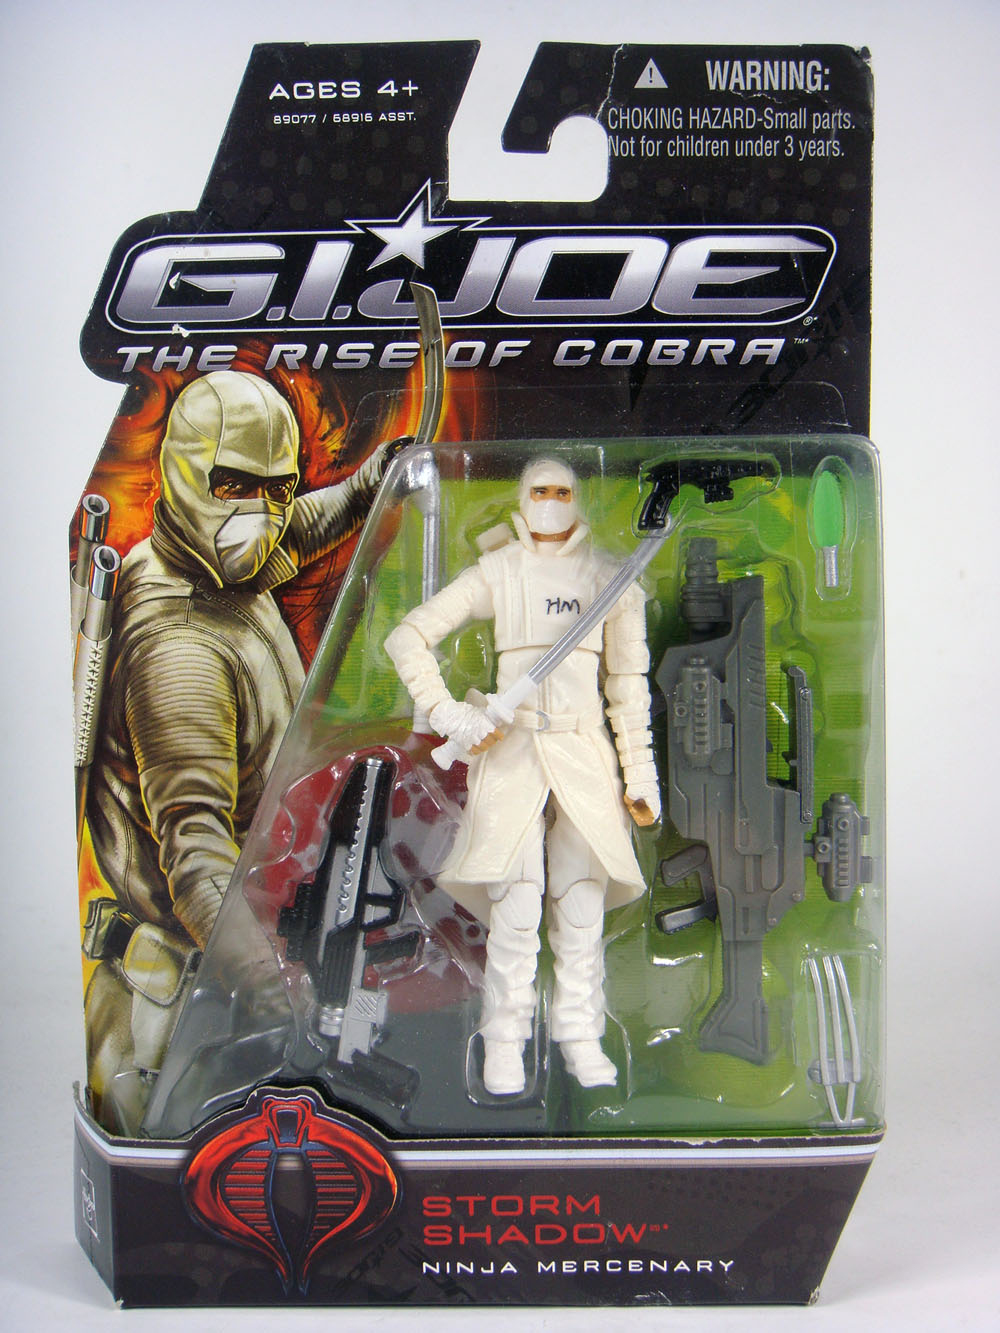 gi joe 2009 lot of 5 roc rise of cobra storm shadow  Missile accessories A112 